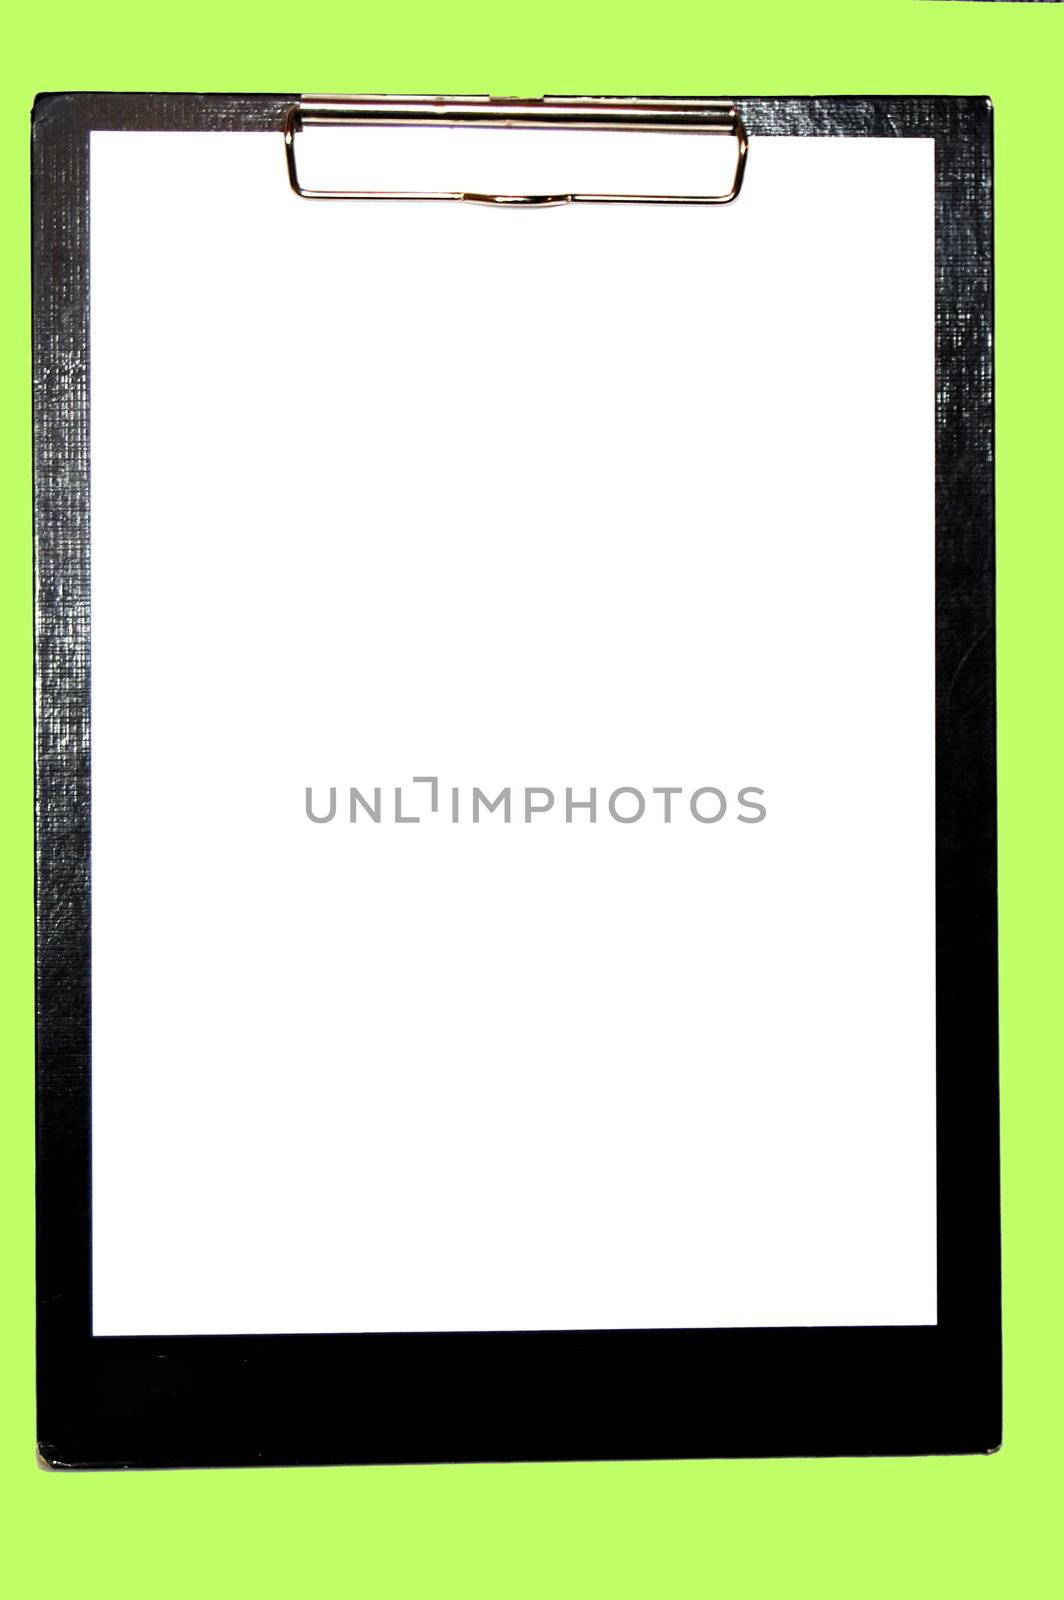 clipboard isolated on white with empty space for text message